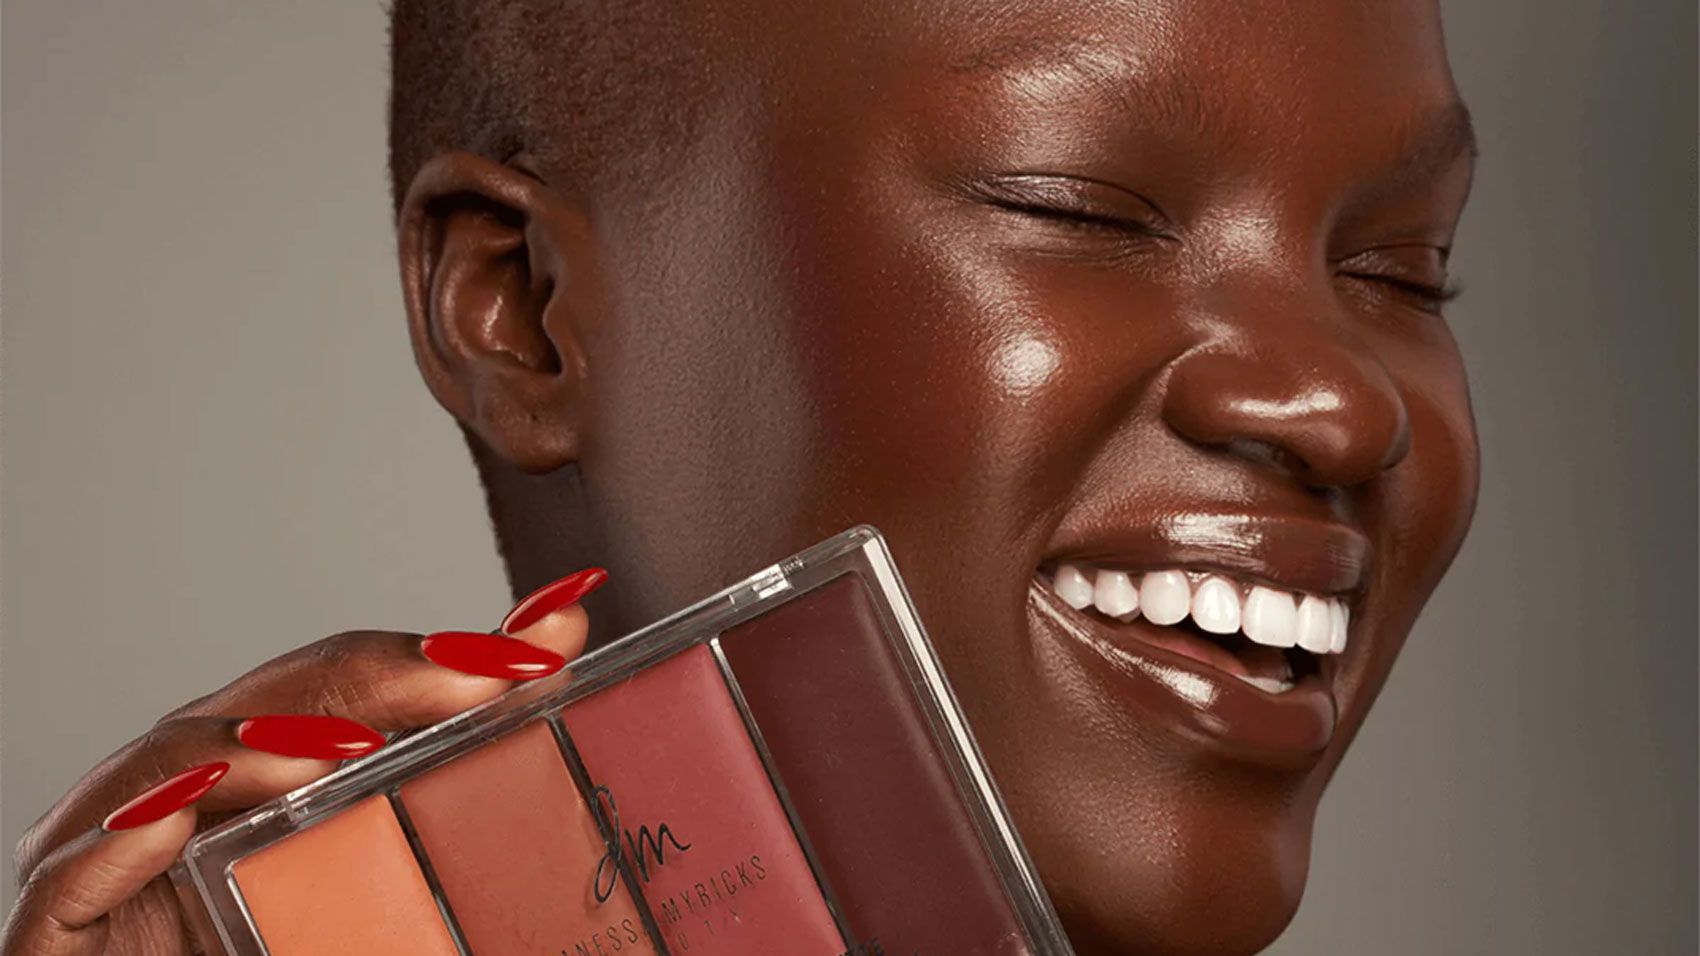 10 holy grail Fenty Beauty products you need to try - A Woman's Confidence